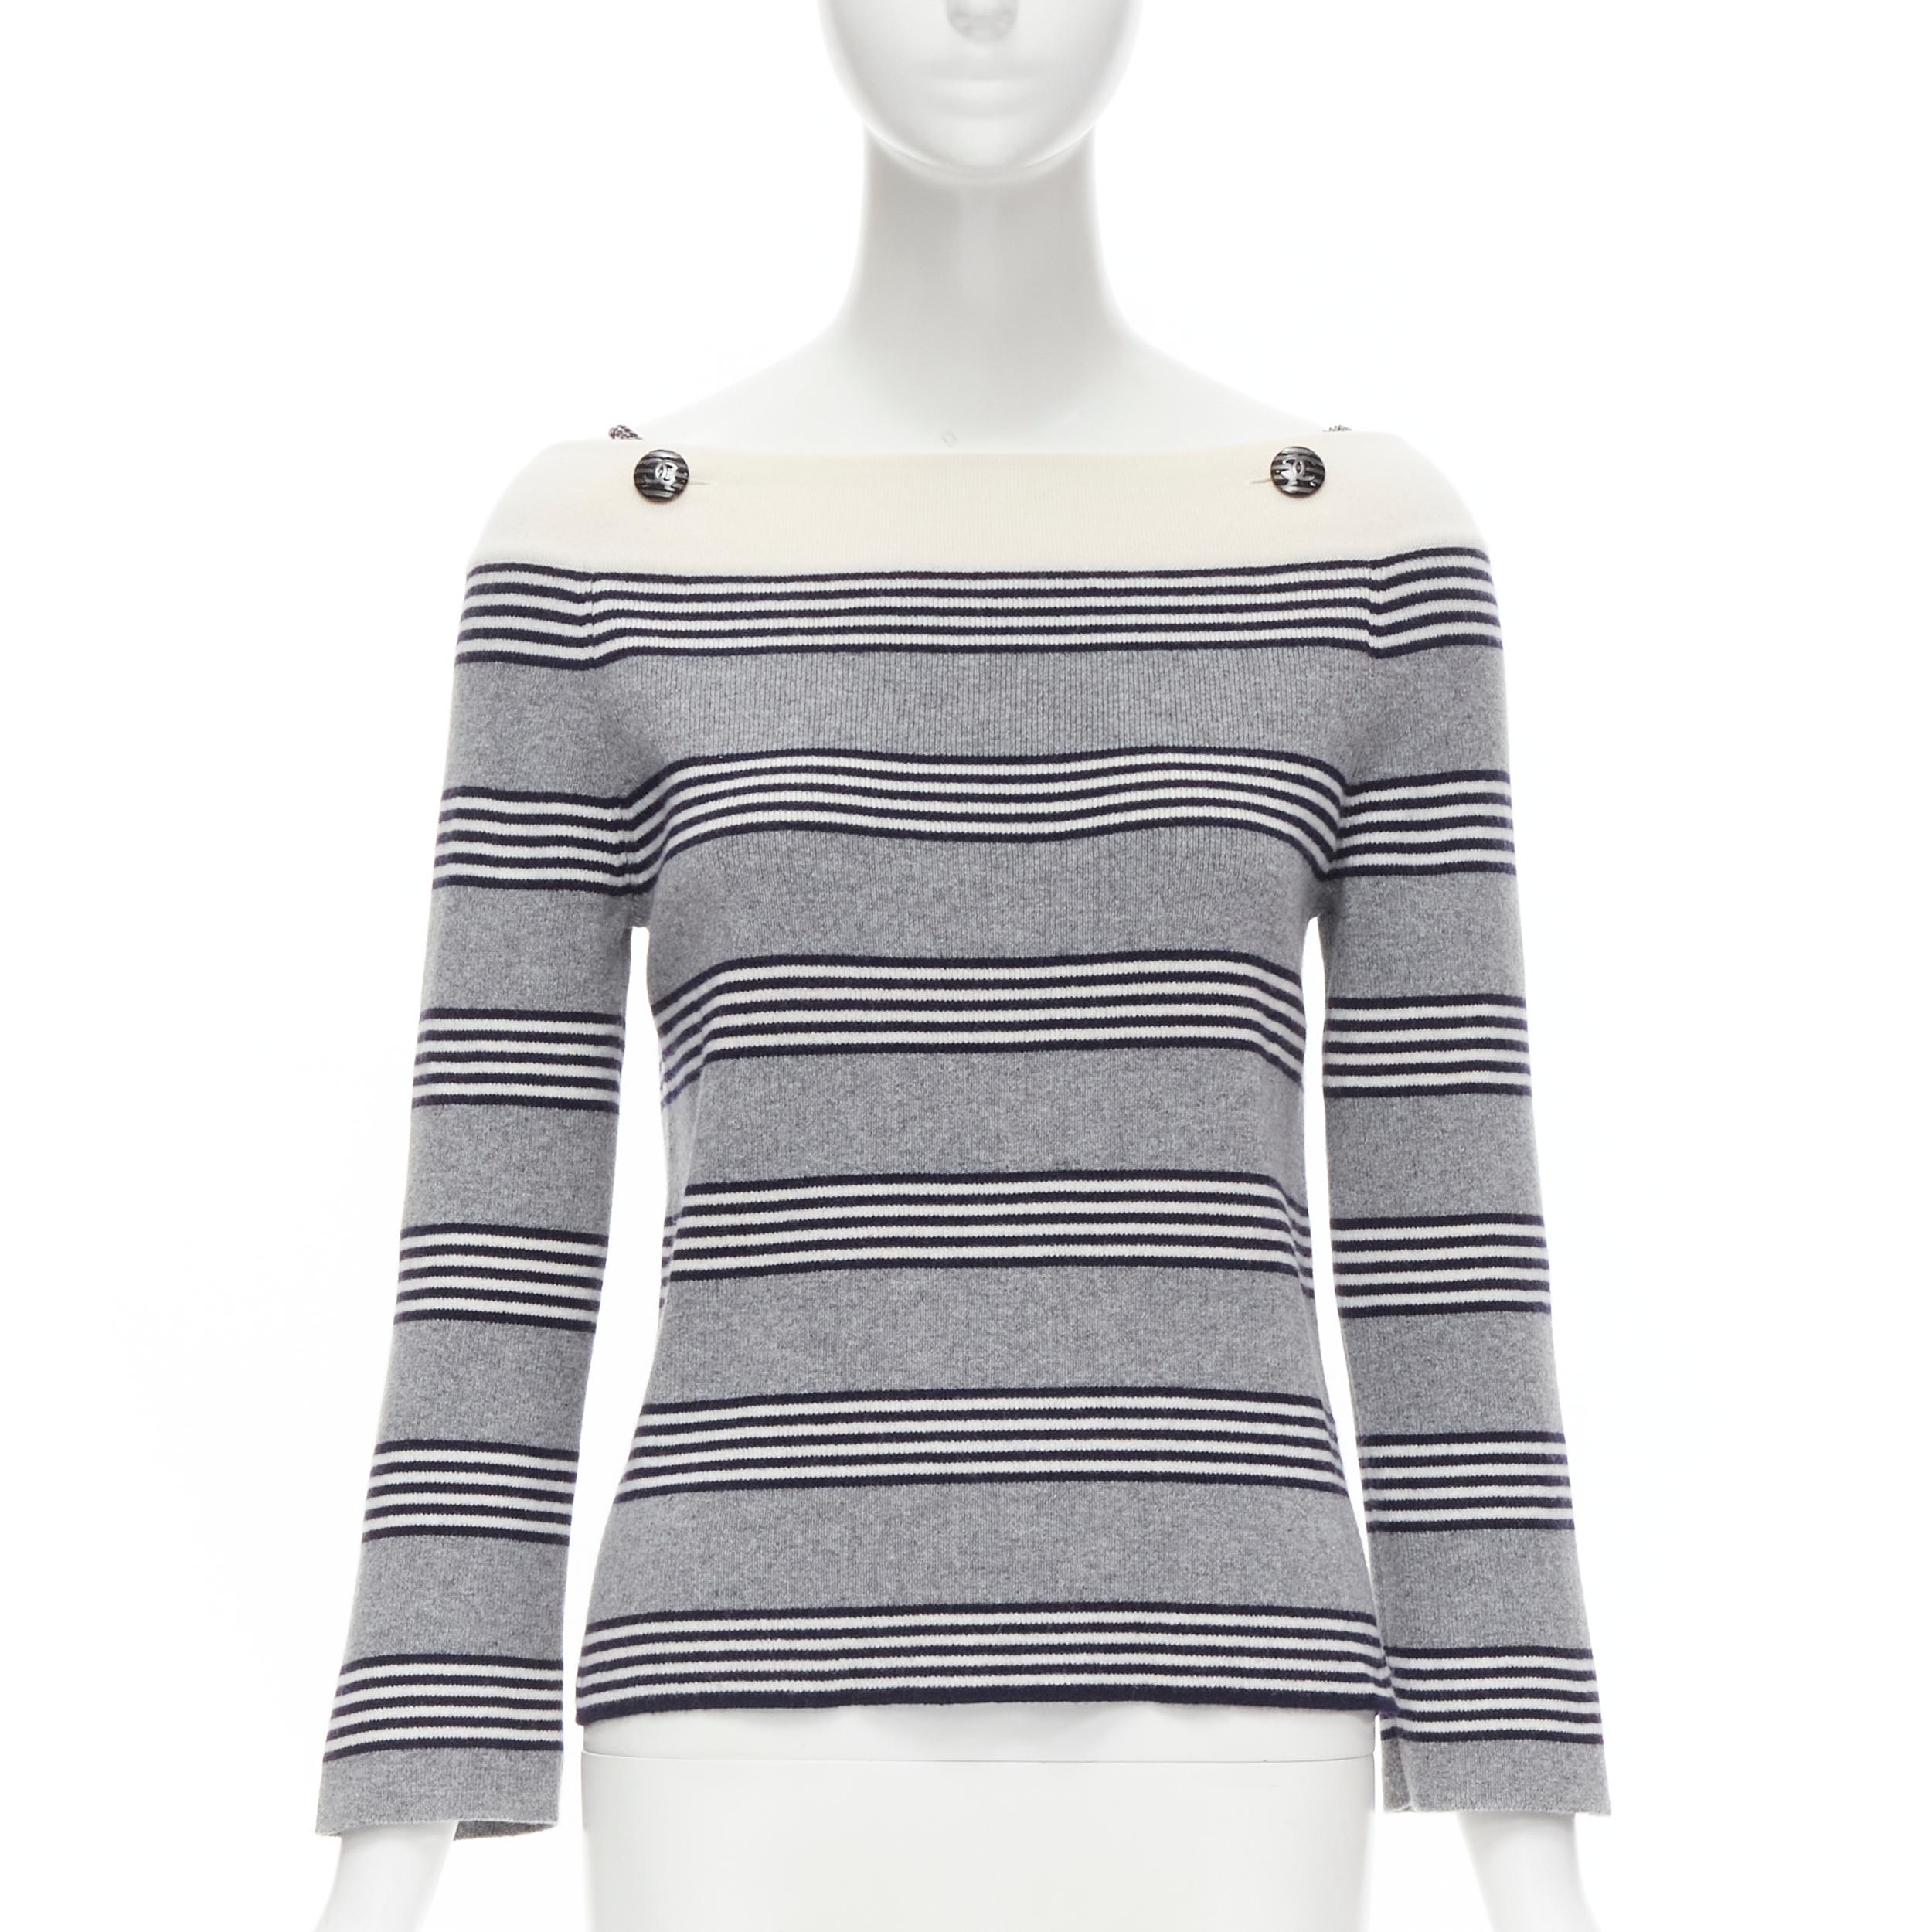 Authentic Chanel Navy Logomania Cashmere Top on sale at JHROP